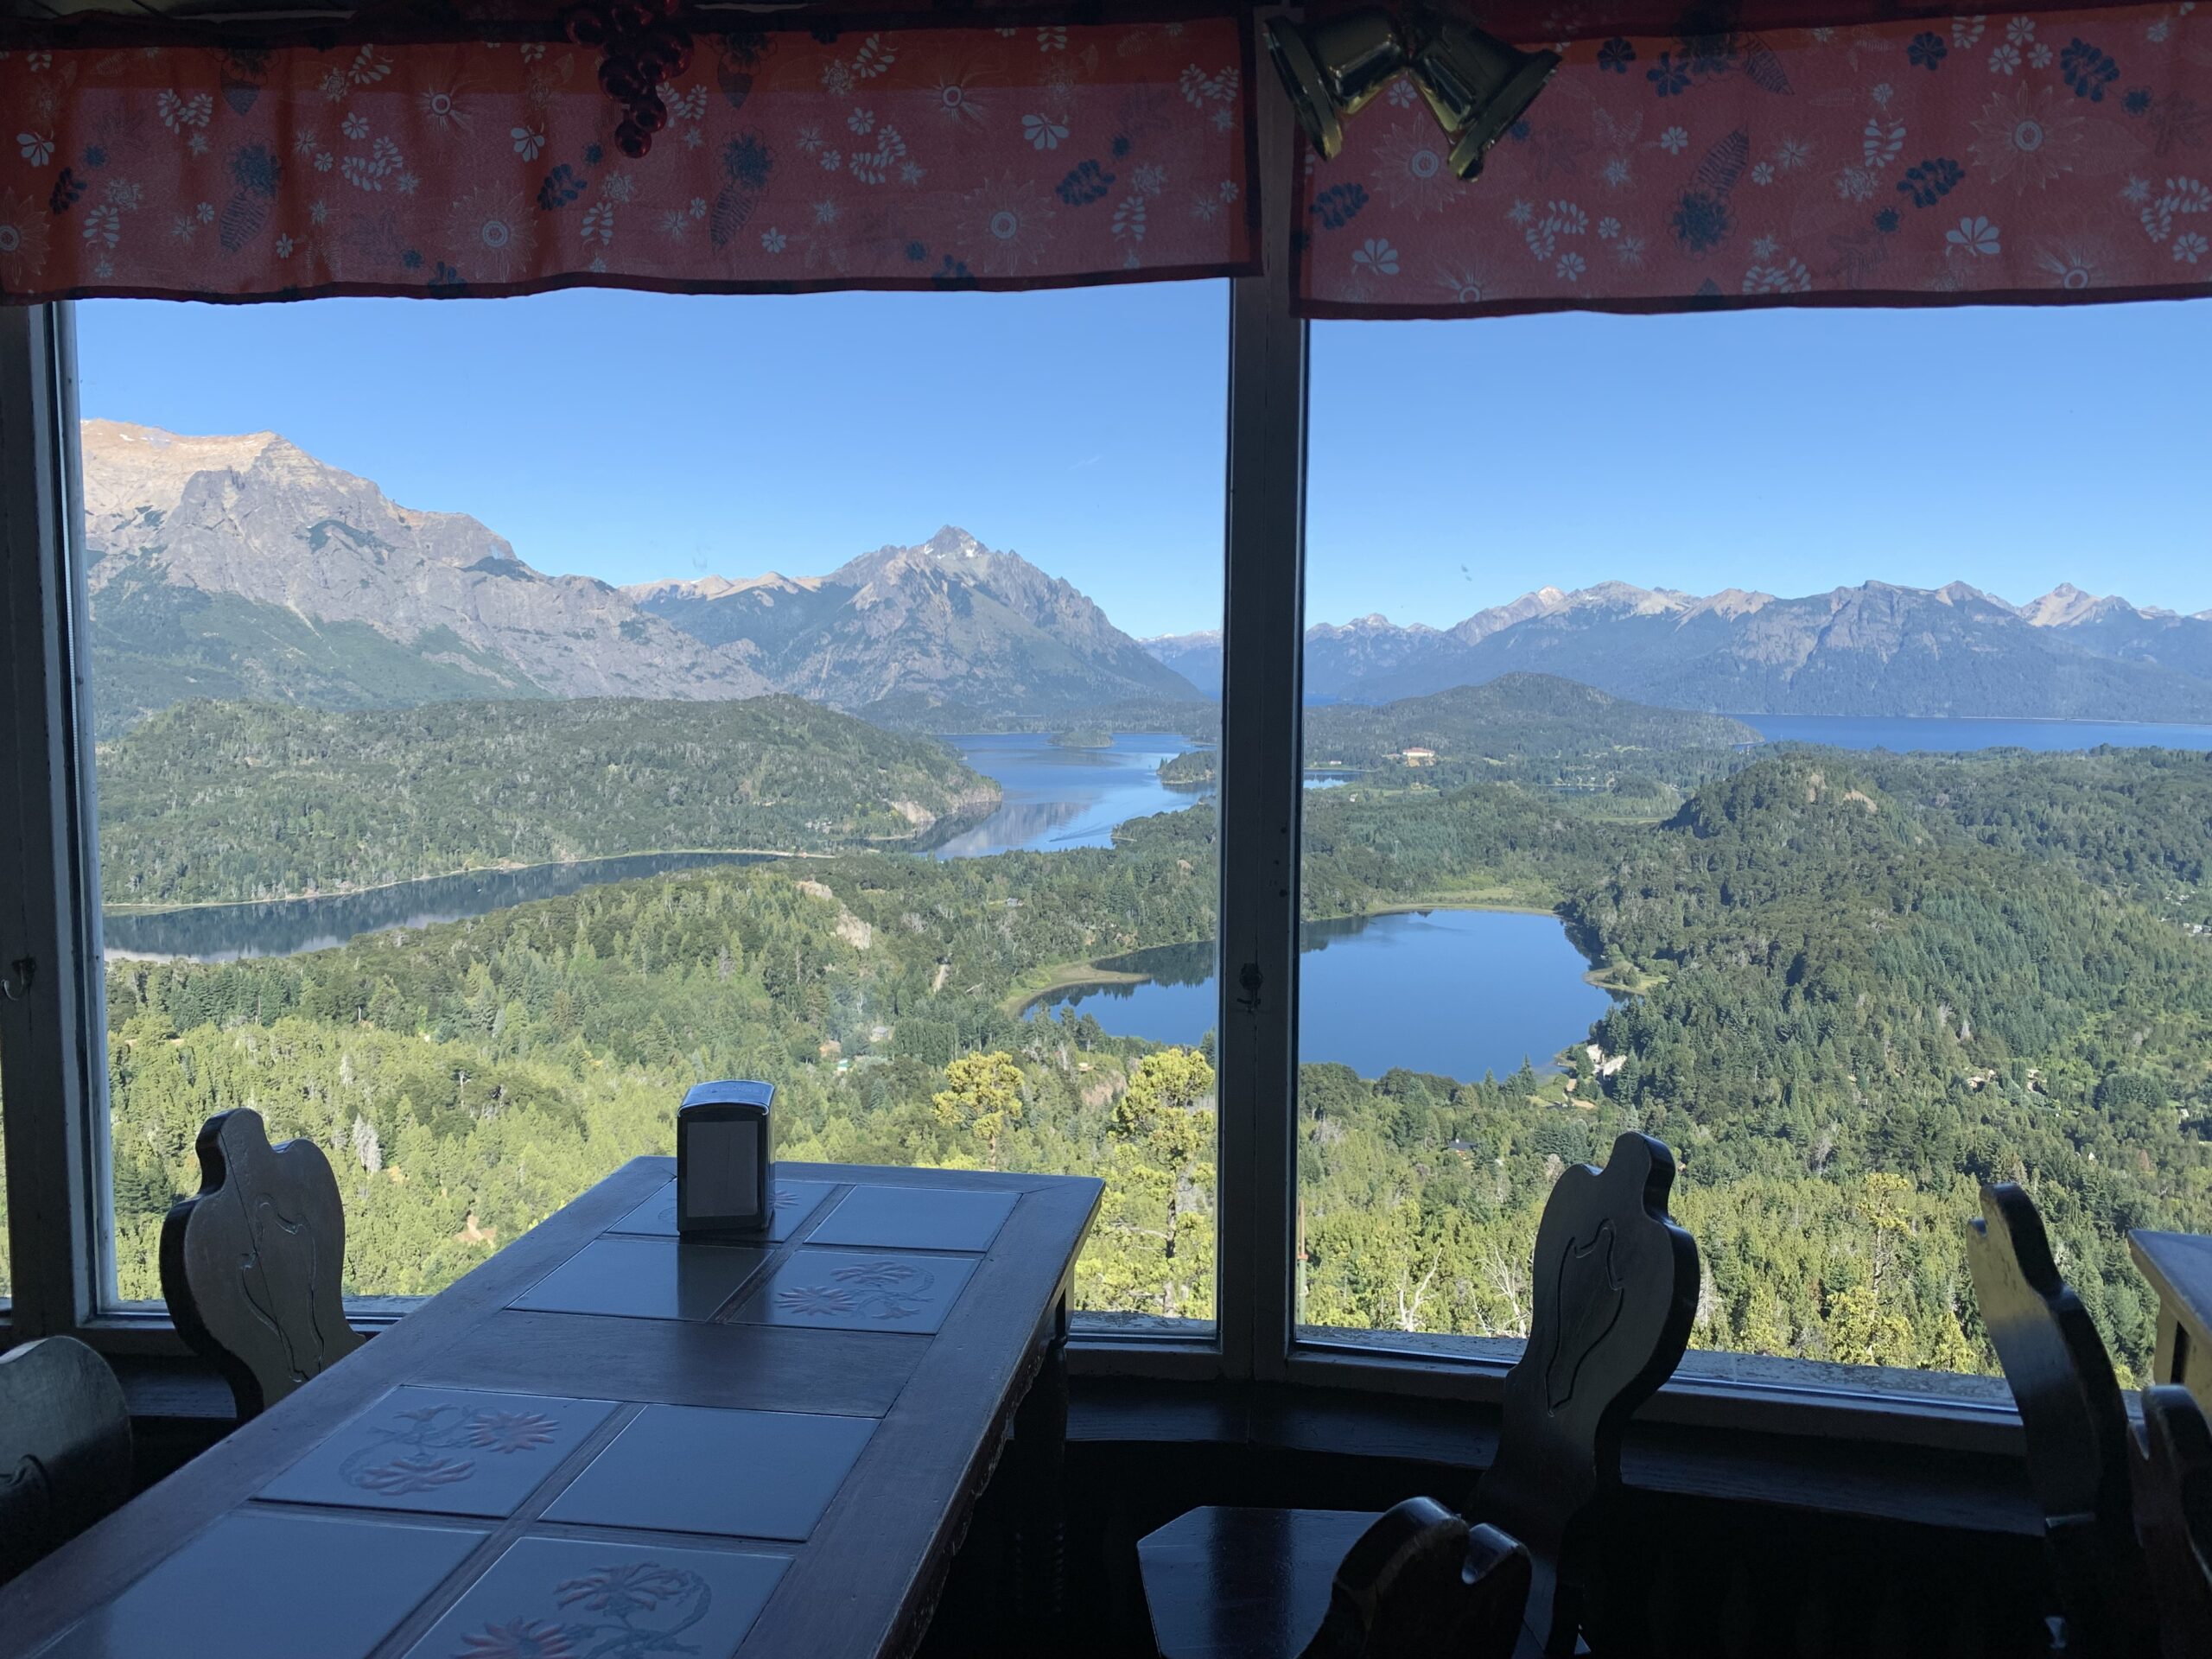 Restaurant with a View - Bariloche, Argentina